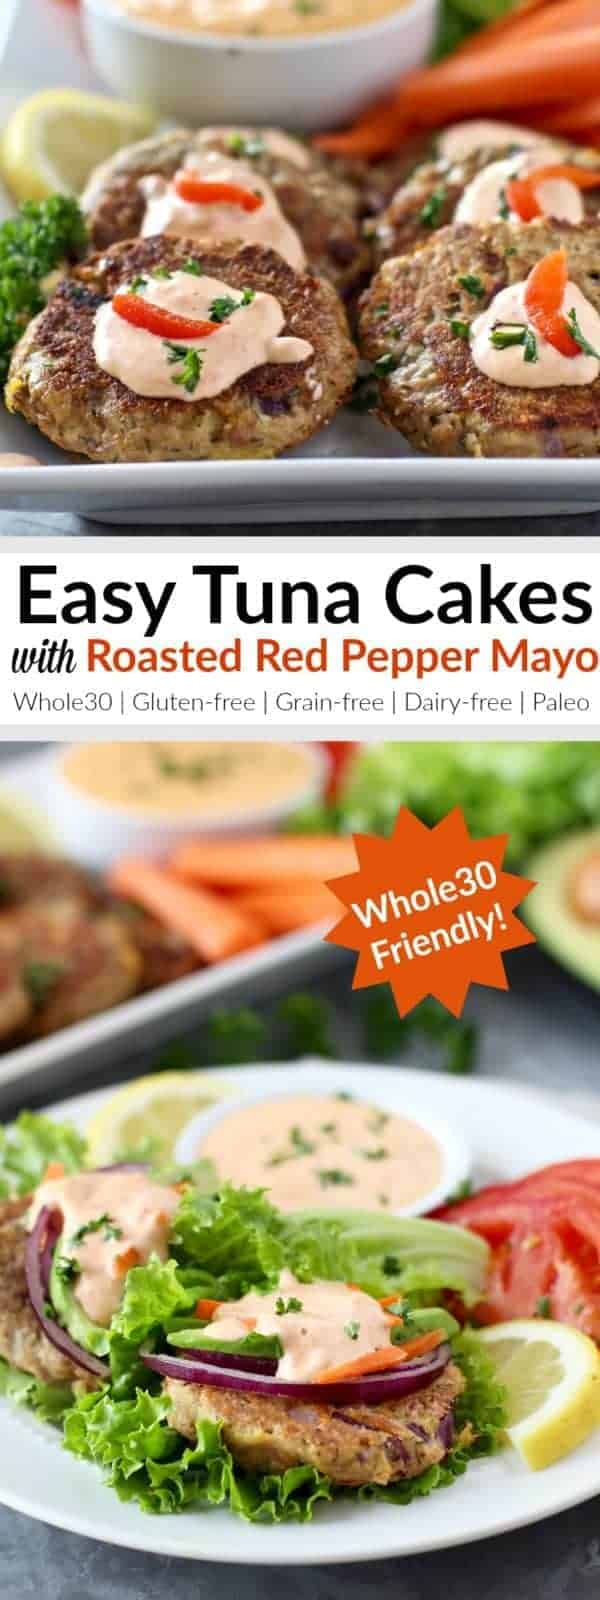 pinterest image for Easy Tuna Cakes with Roasted Red Pepper Mayo